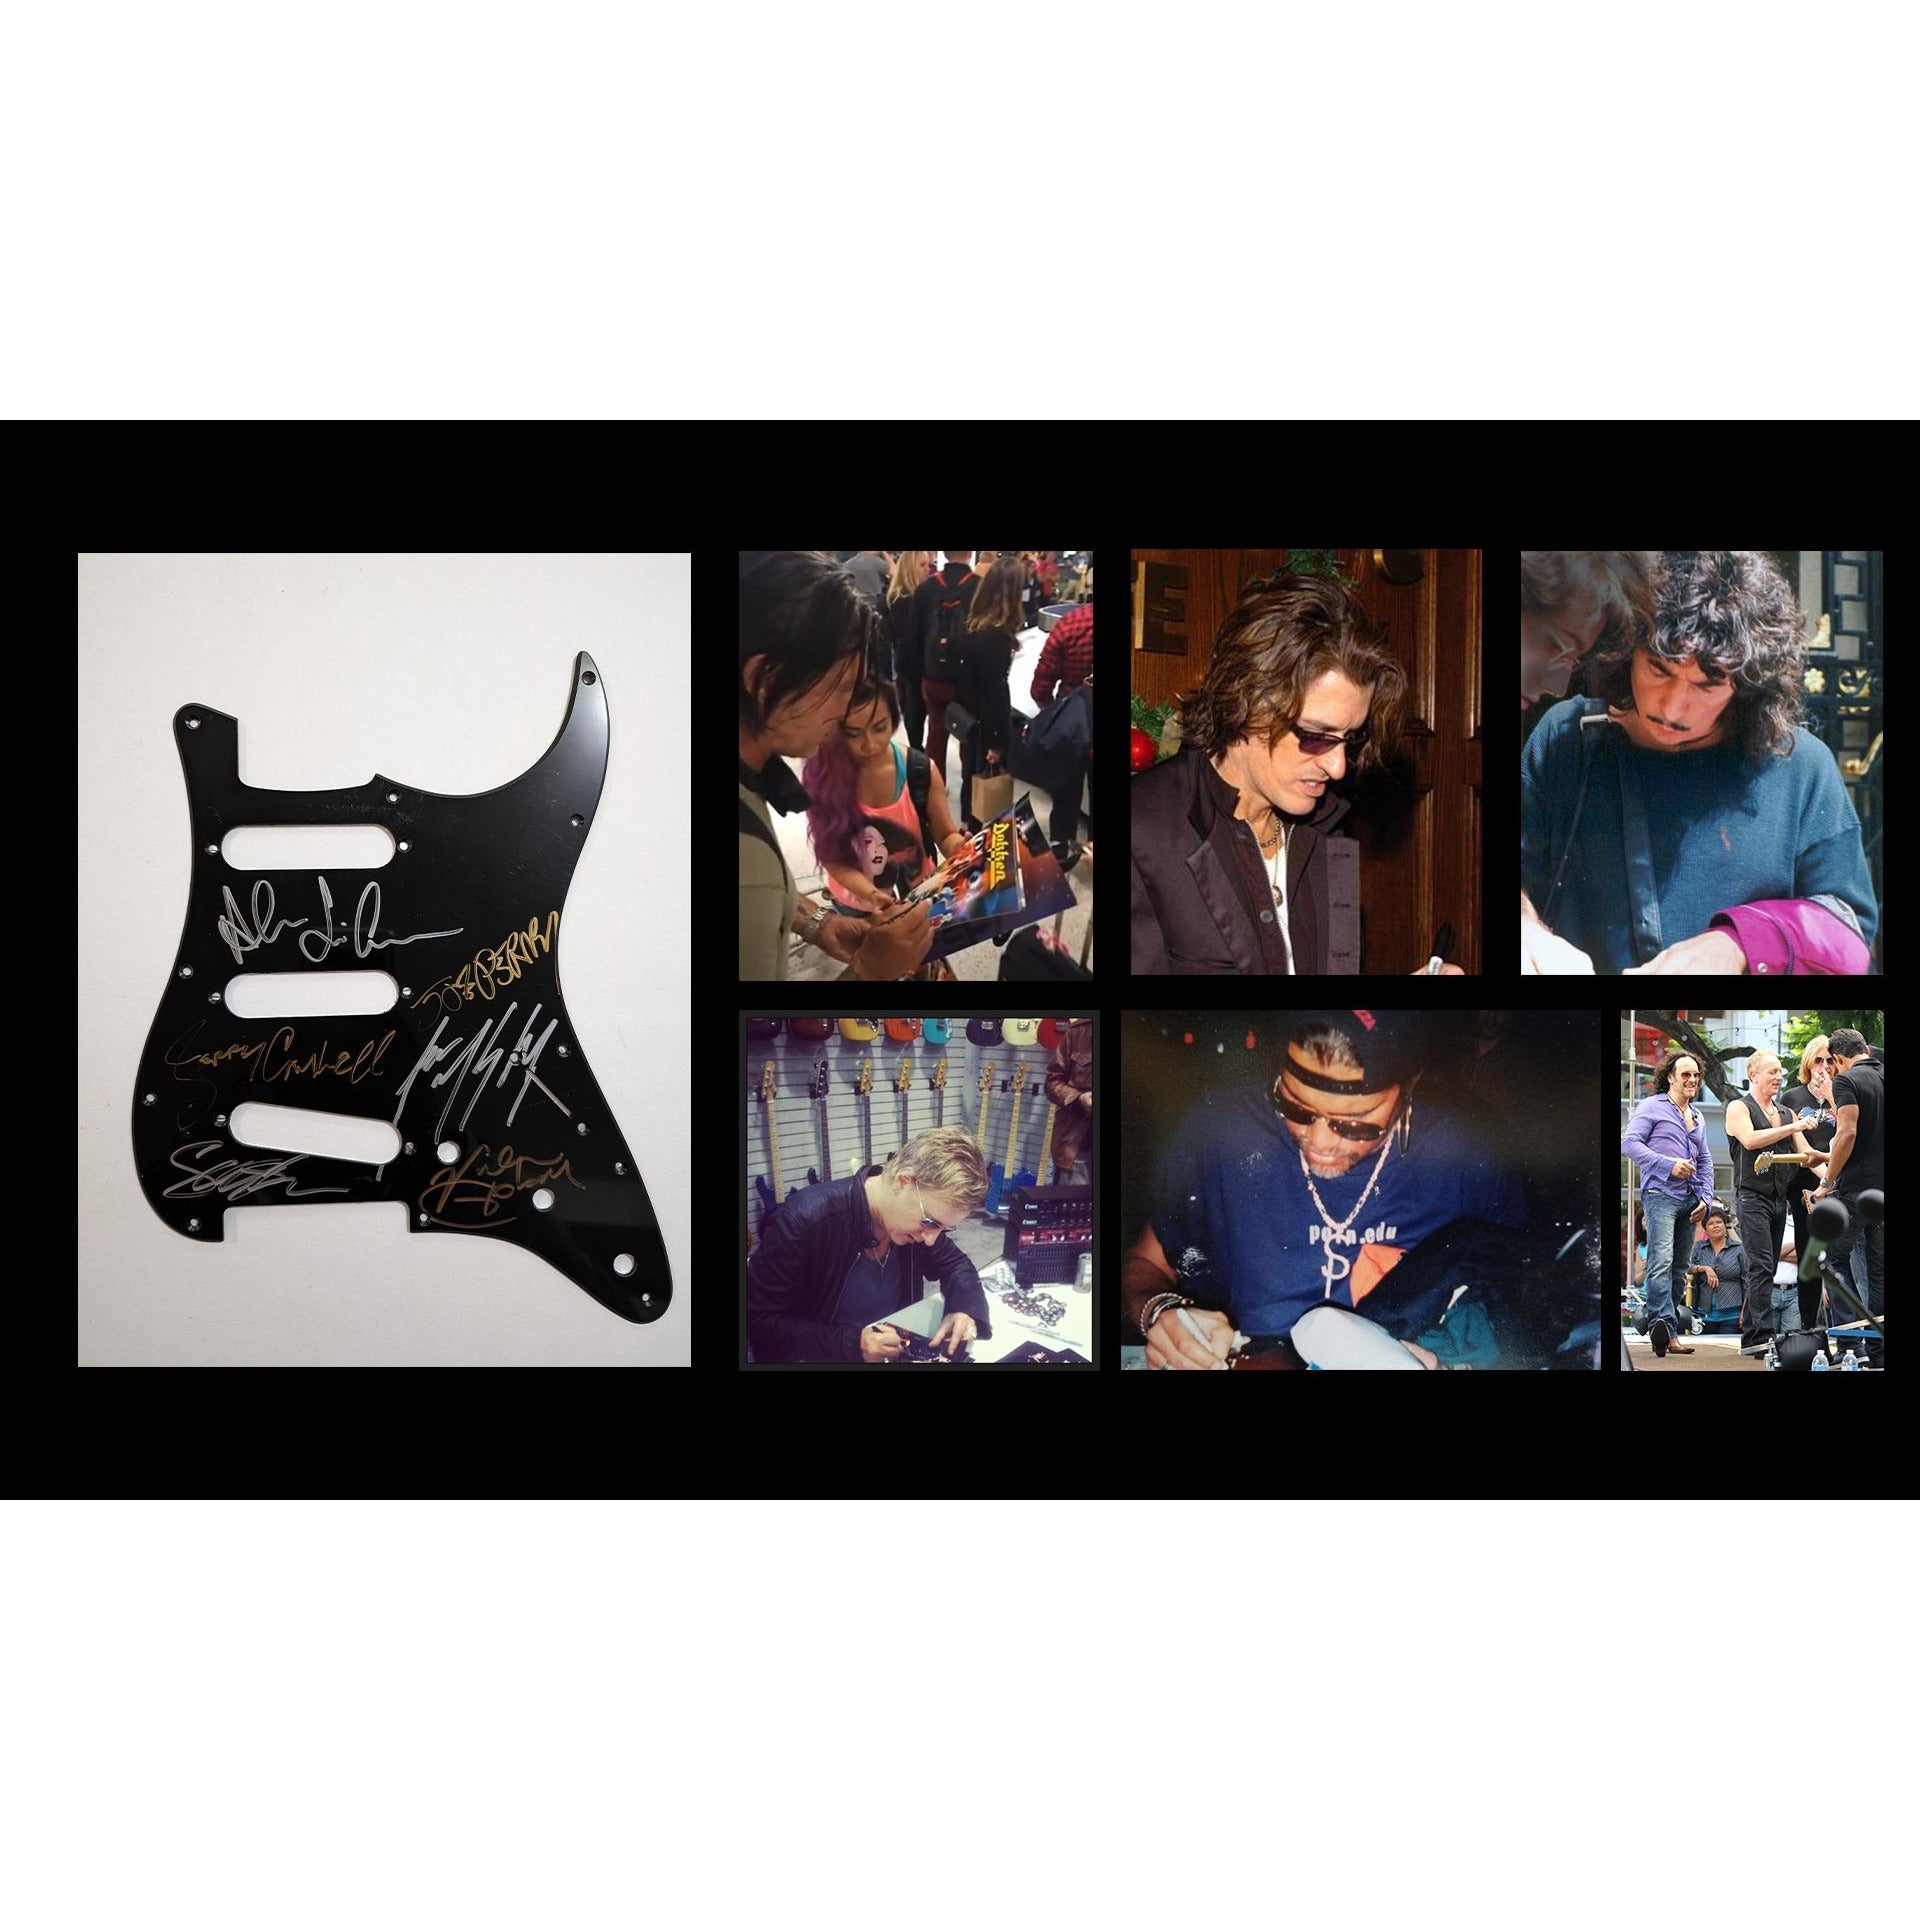 George Lynch Vivian Campbell Slash Joe Perry Alex Lifeson Jerry Cantrell Ritchie Blackmore Guitar legends stratocaster pickguard signed with